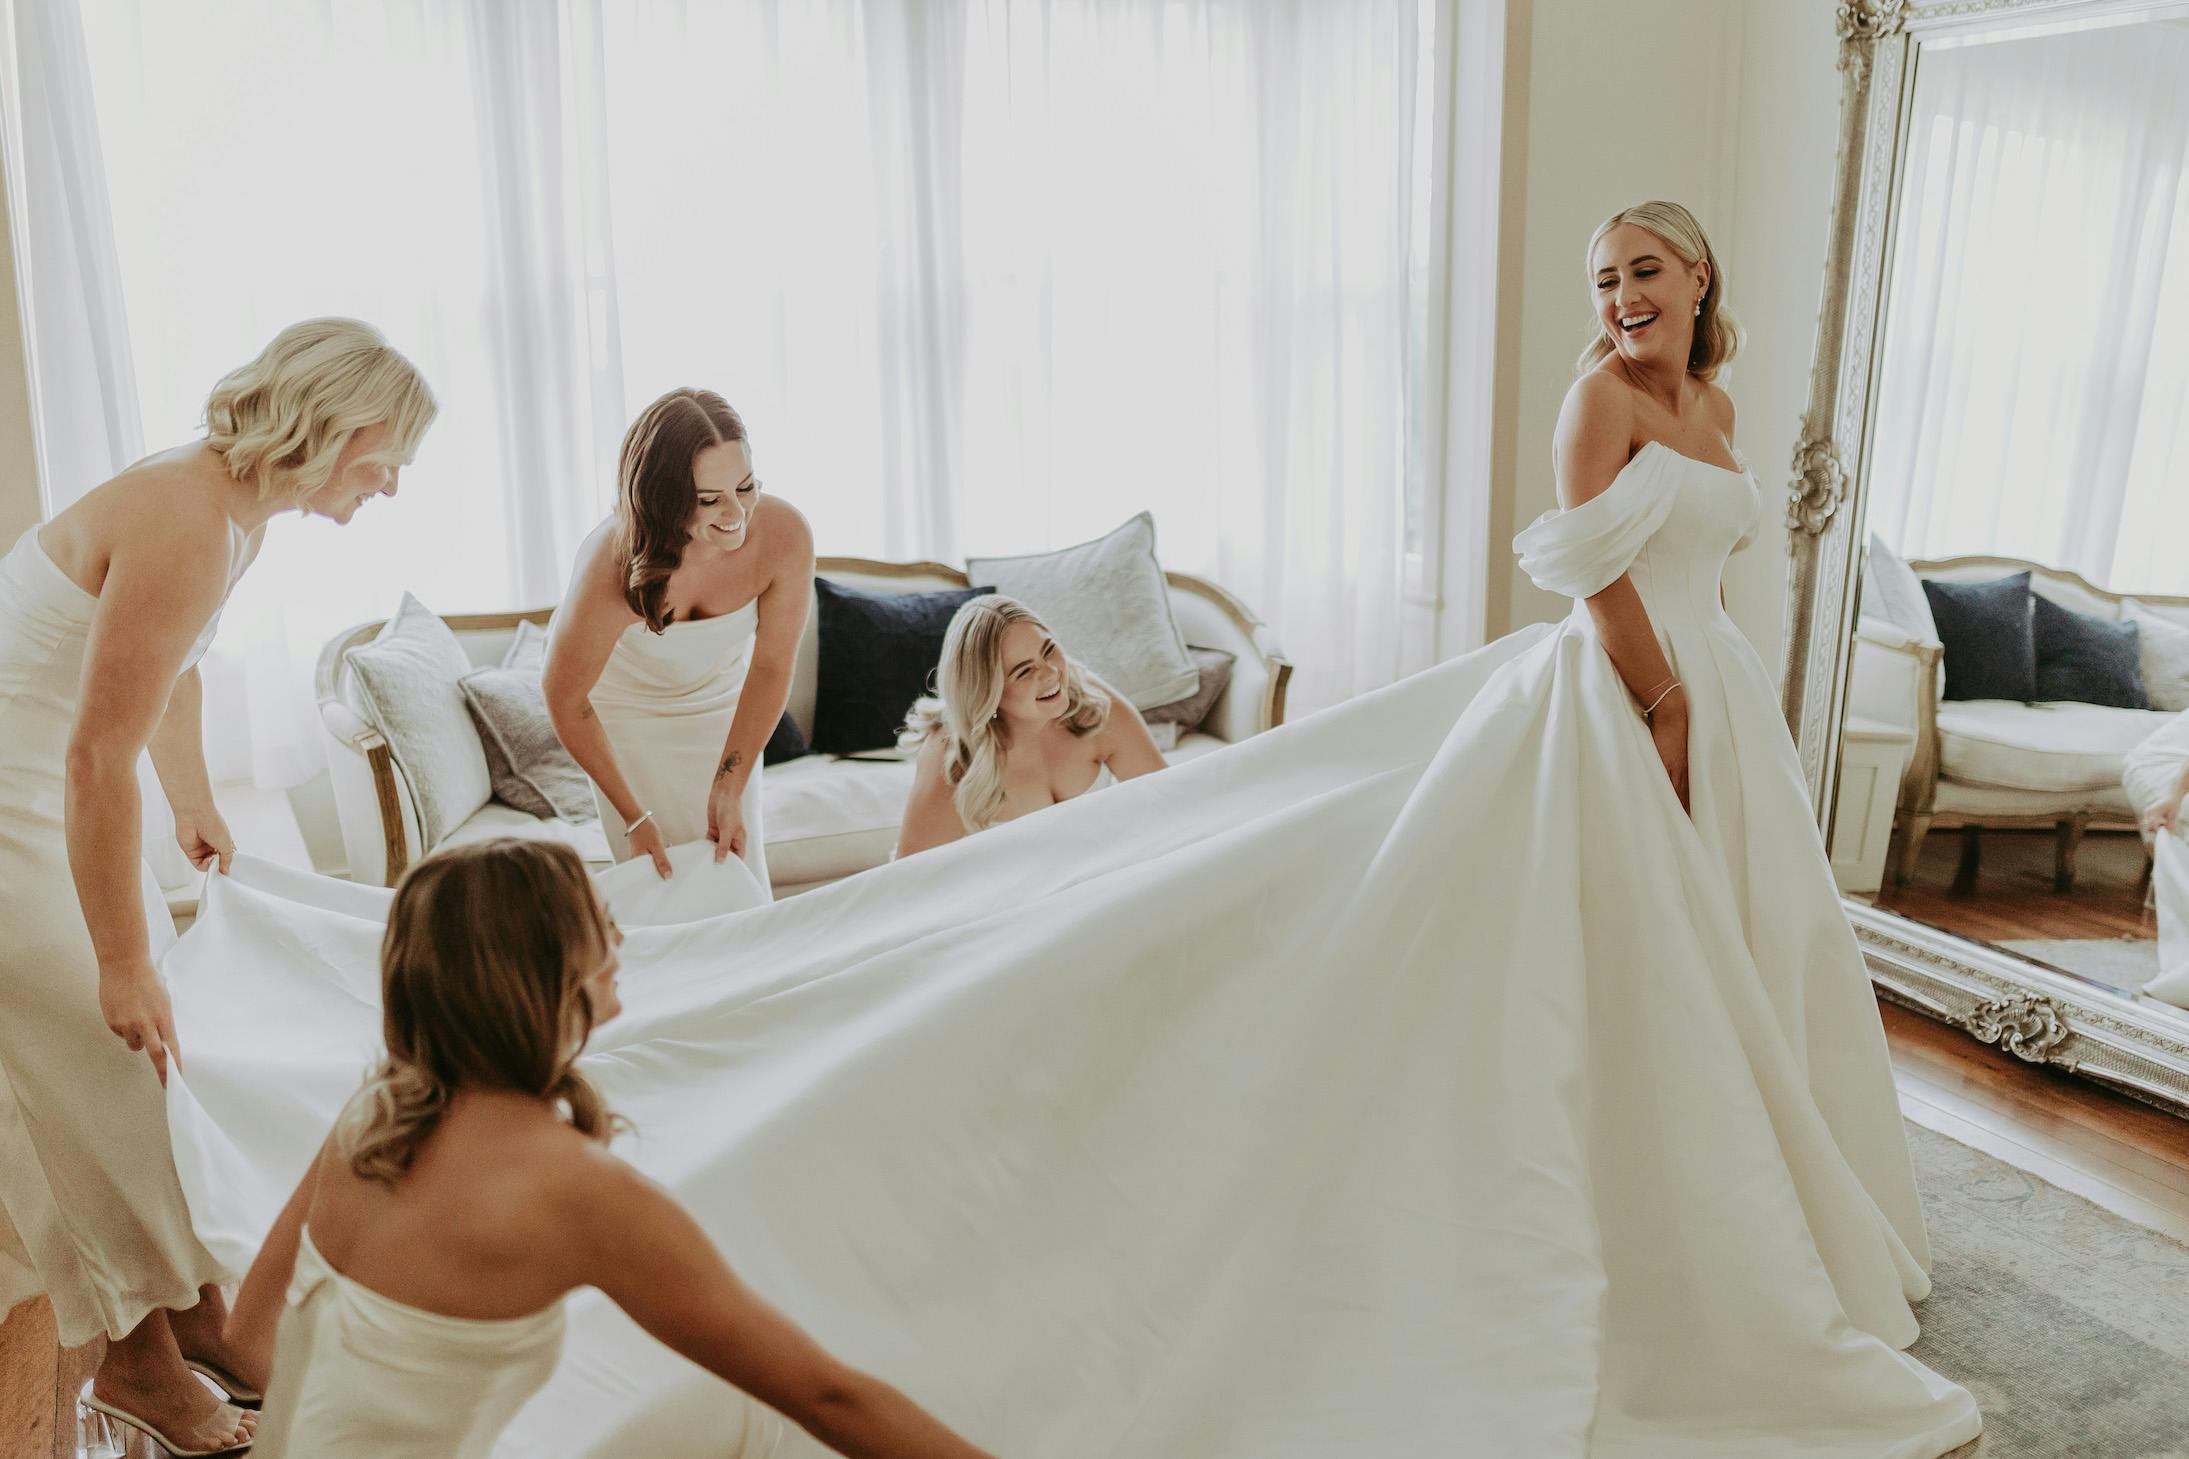 A bride in an off-the-shoulder wedding dress stands smiling while four bridesmaids in matching white dresses gather around her, helping with her long train. They are in a bright room with a large window and a full-length mirror.